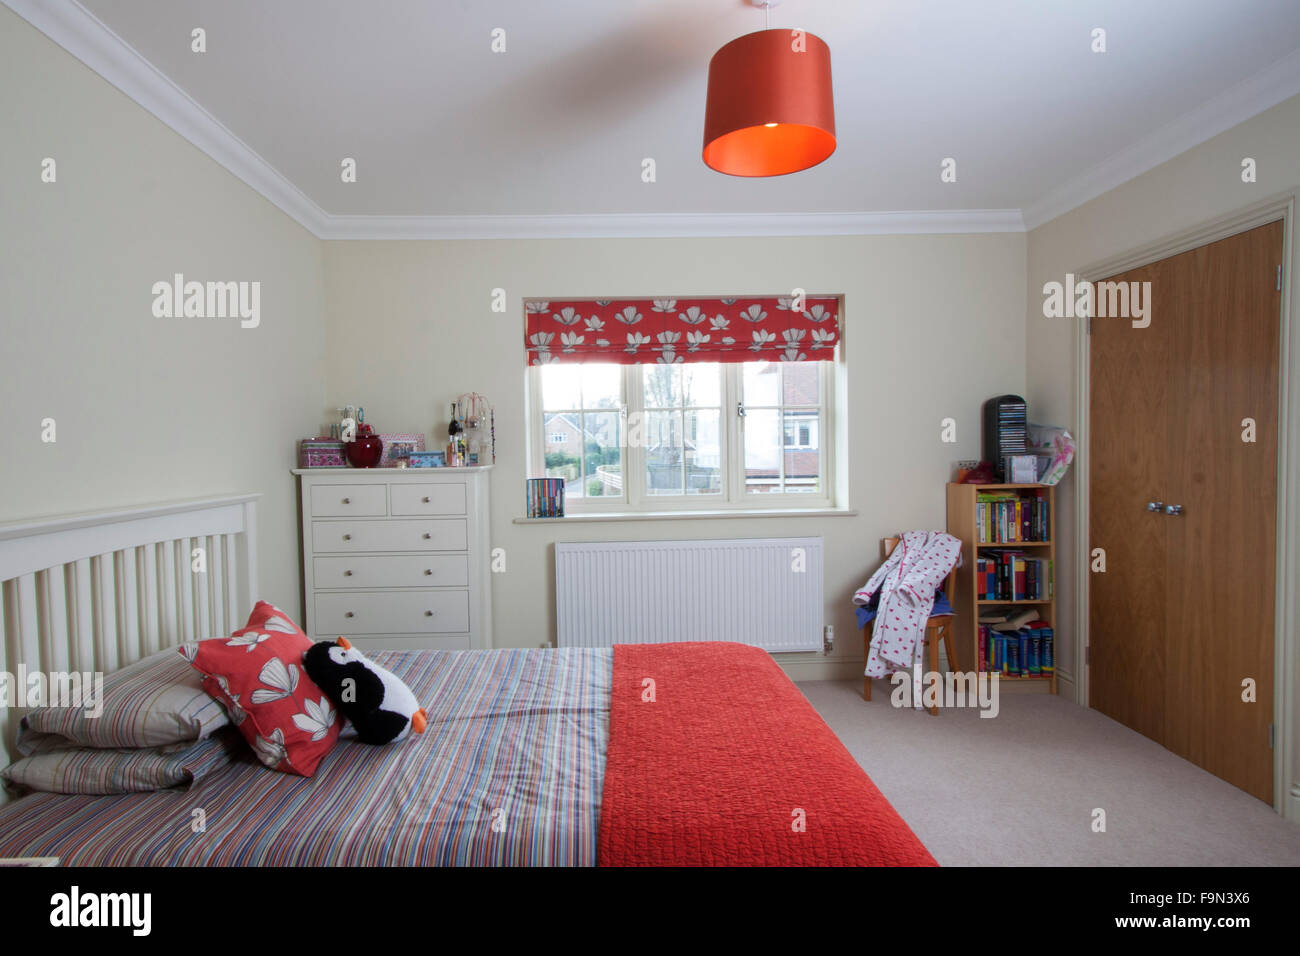 Bedroom with a red colour scheme Stock Photo